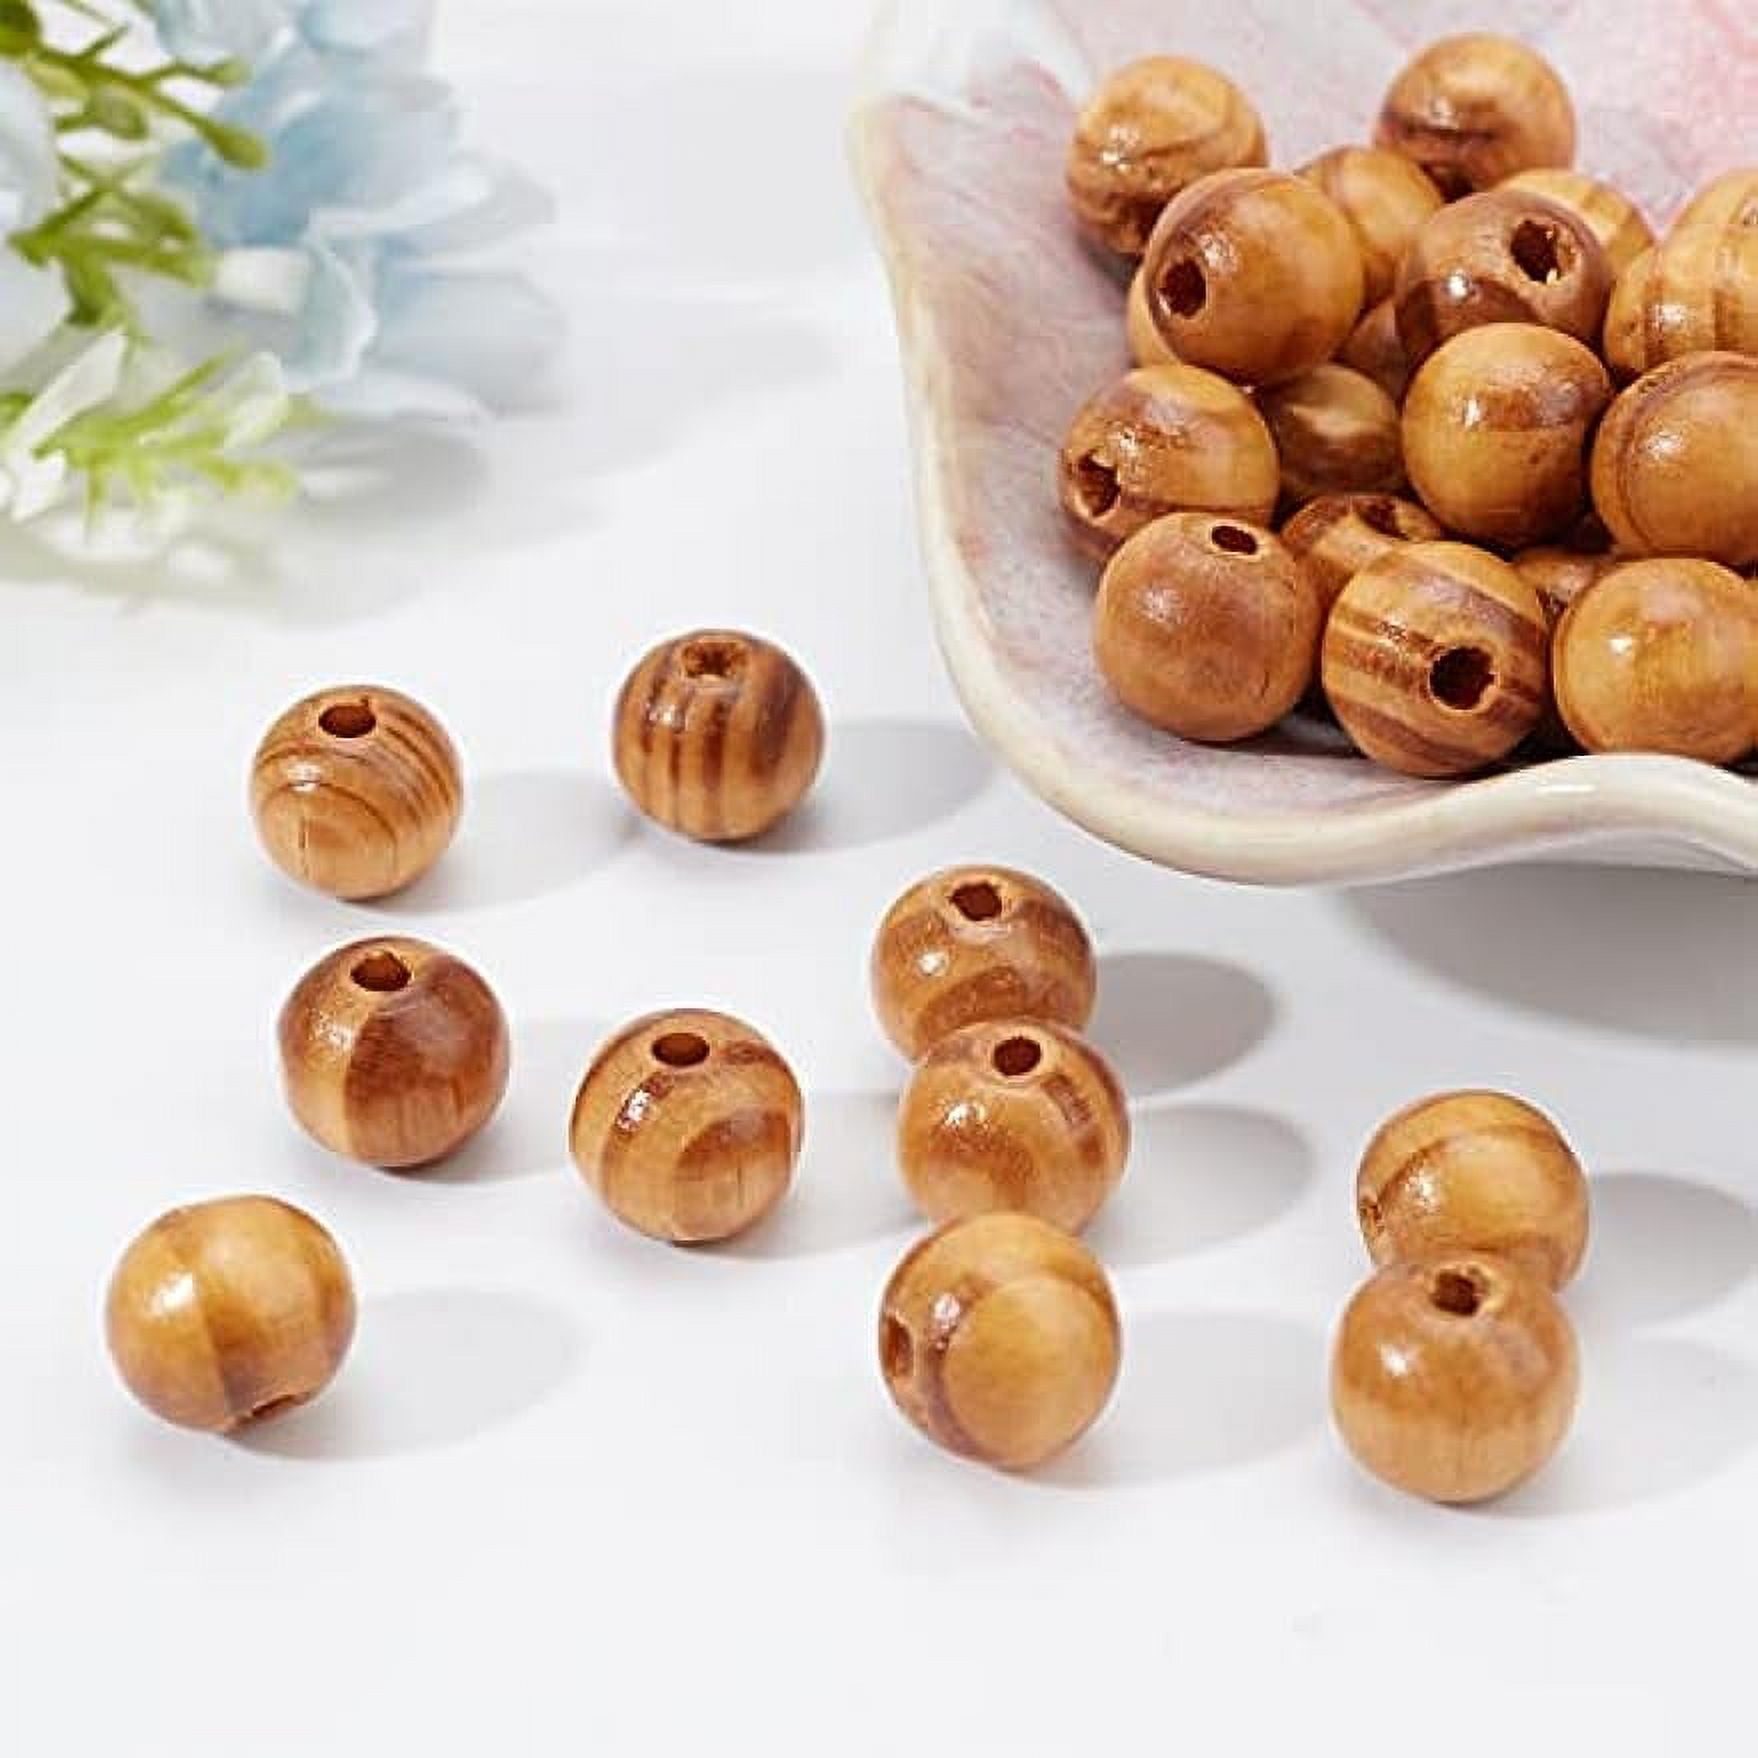 40mm Wood Beads 30pcs Unfinished Large Wooden Beads Natural Wood Ball Loose  Beads Wood Spacer Bead for Craft Farmhouse Garland Decor Home Macrame  Christmas Jewelry Making 